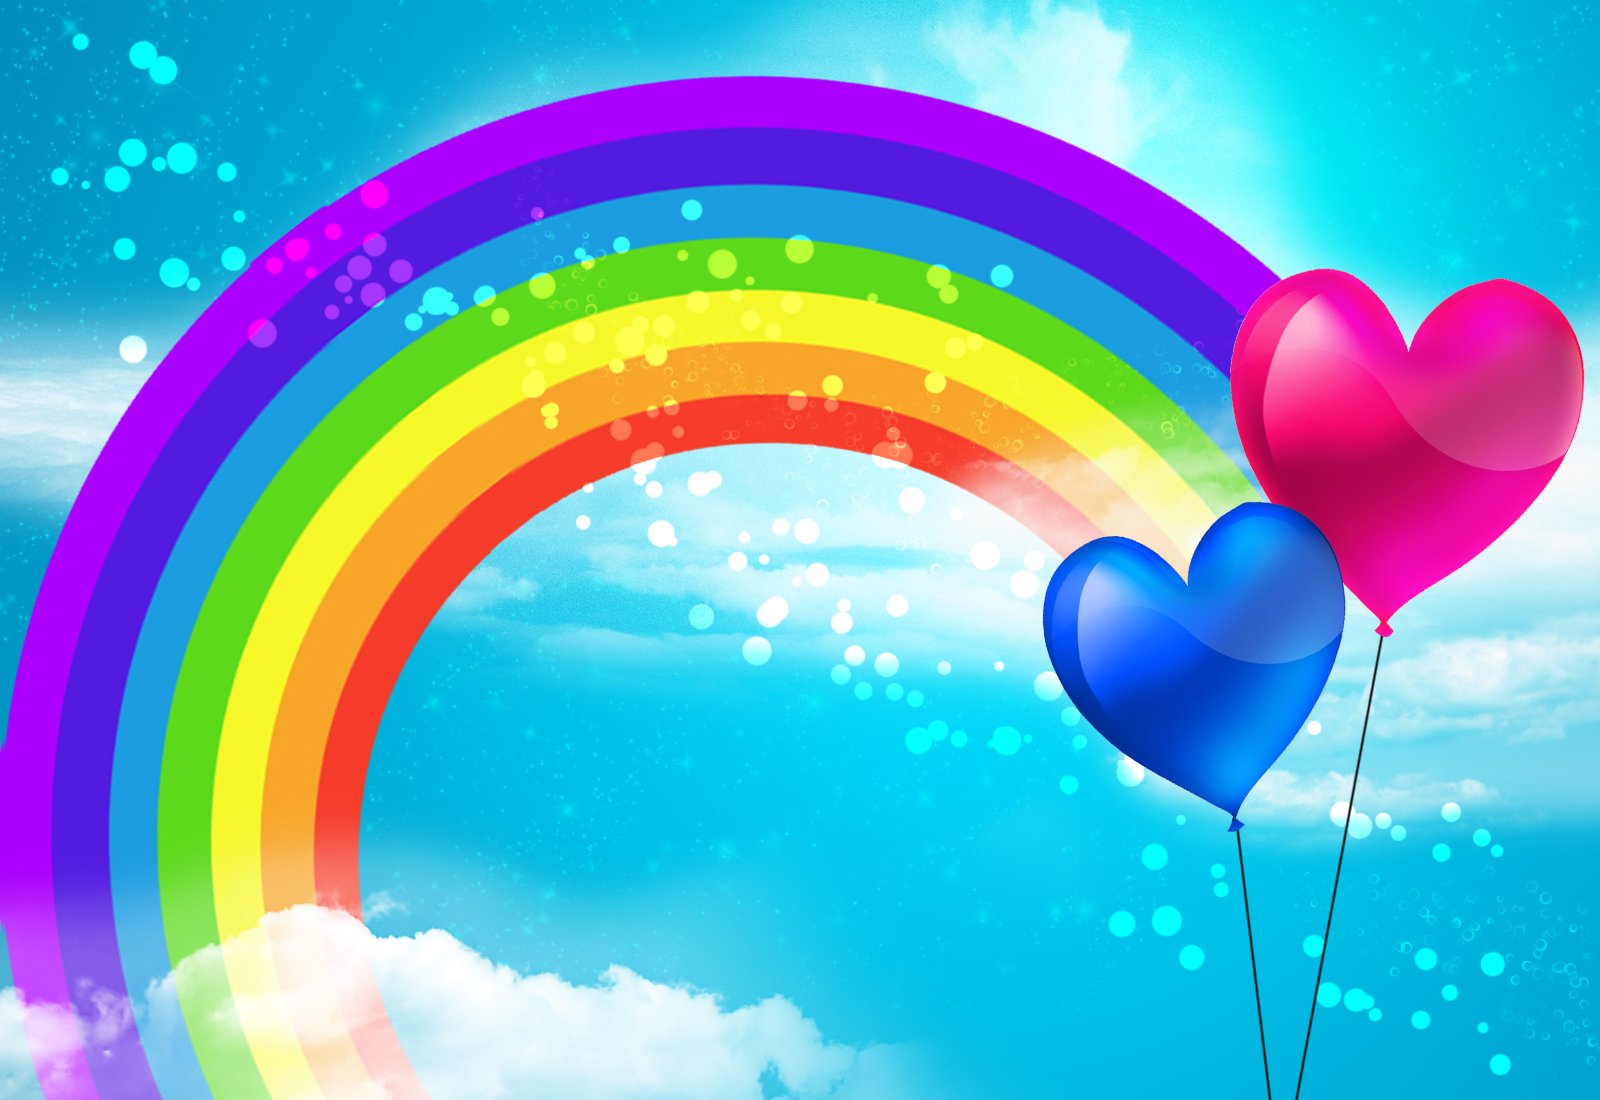 two hearts shaped balloons with a rainbow and clouds background